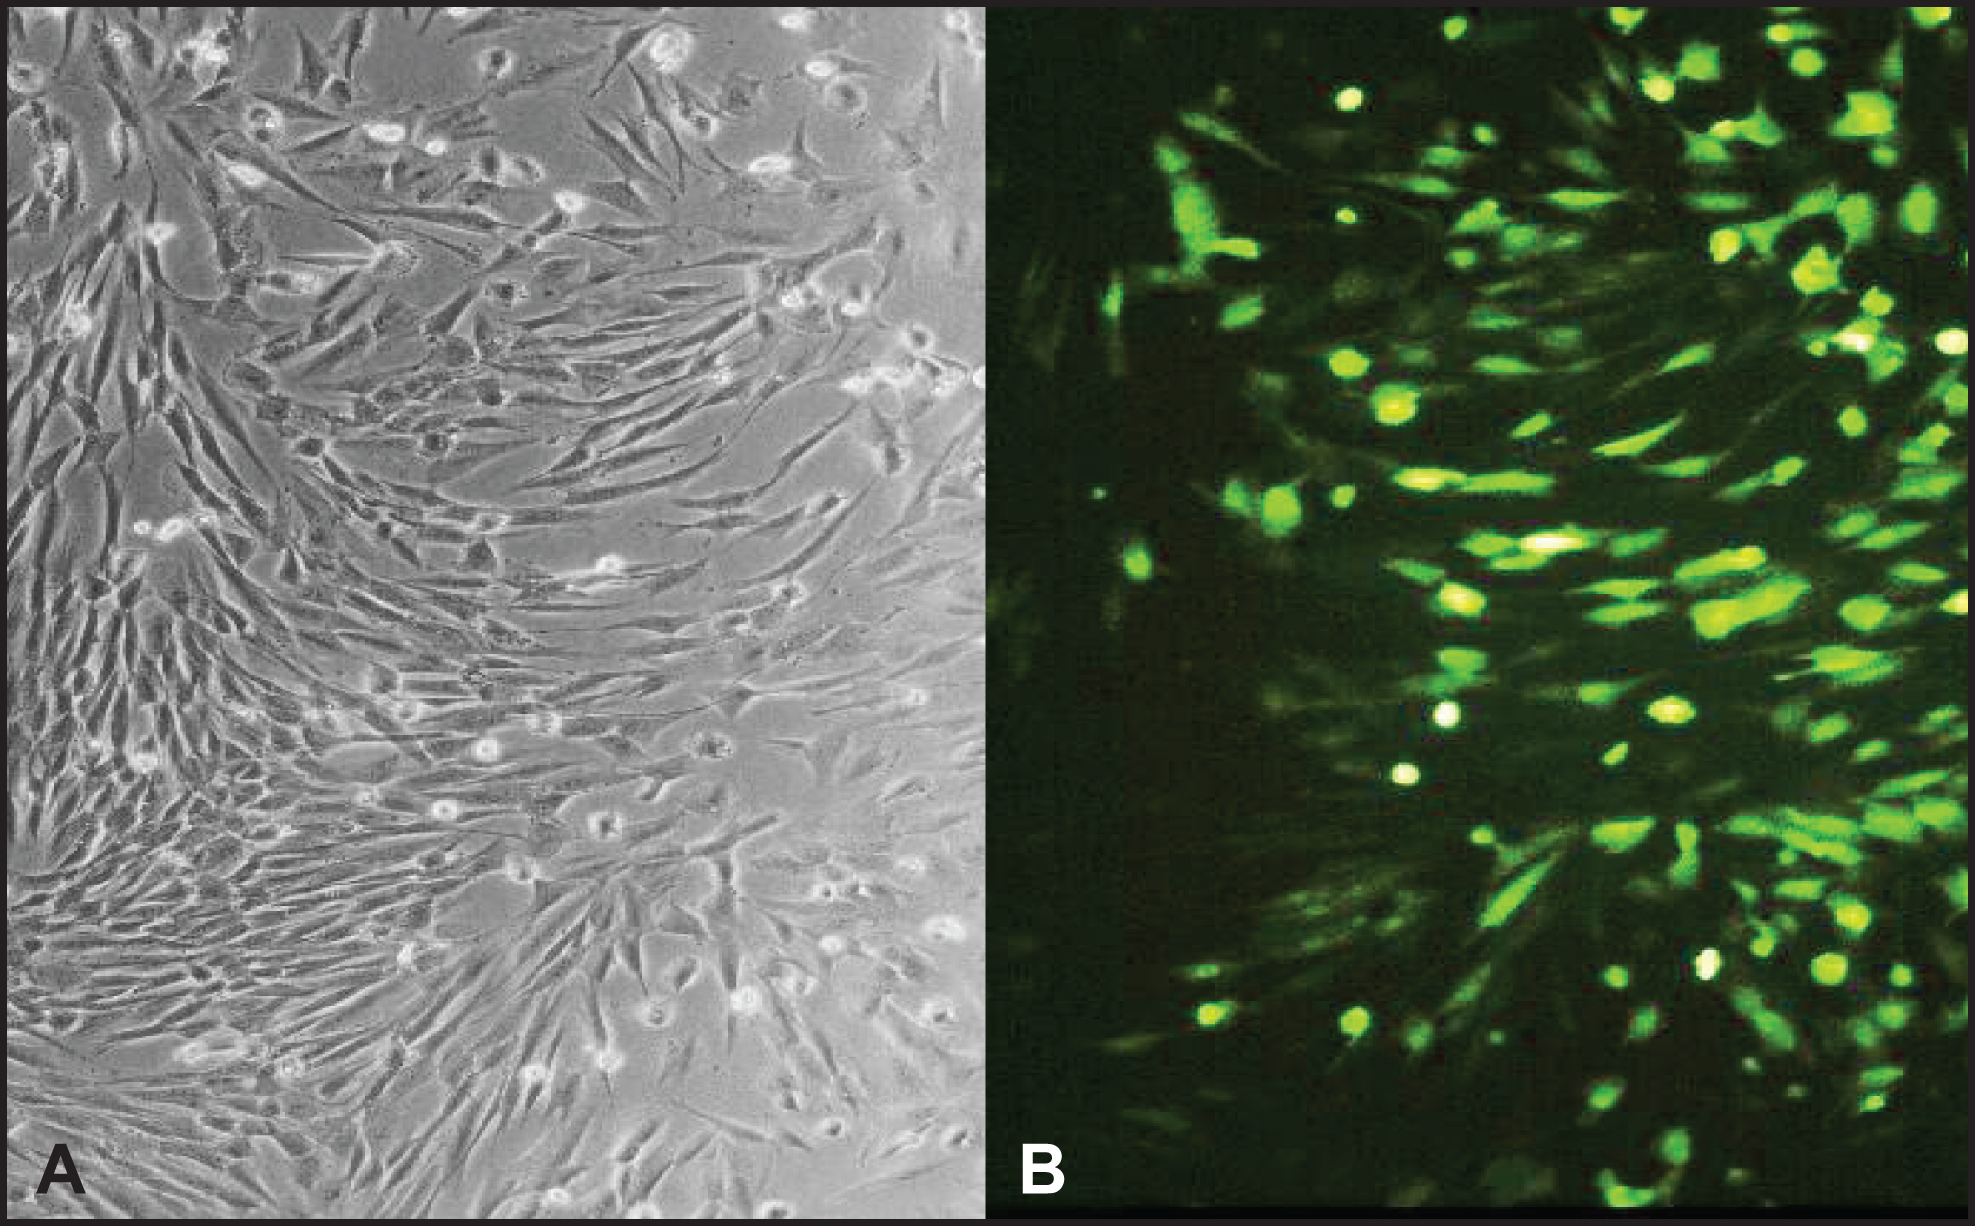 Normal human skin fibroblasts are efficiently transduced by the recombinant adenovirus. Primary fibroblast were transduced with rAdV-PARP-GFP (MOI = 25). GFP expression was analyzed by fluorescence microscopy 24 h after transduction. Cells successfully transduced expressed a GFP reporter (B). Phase contrast image of the same cells (A).